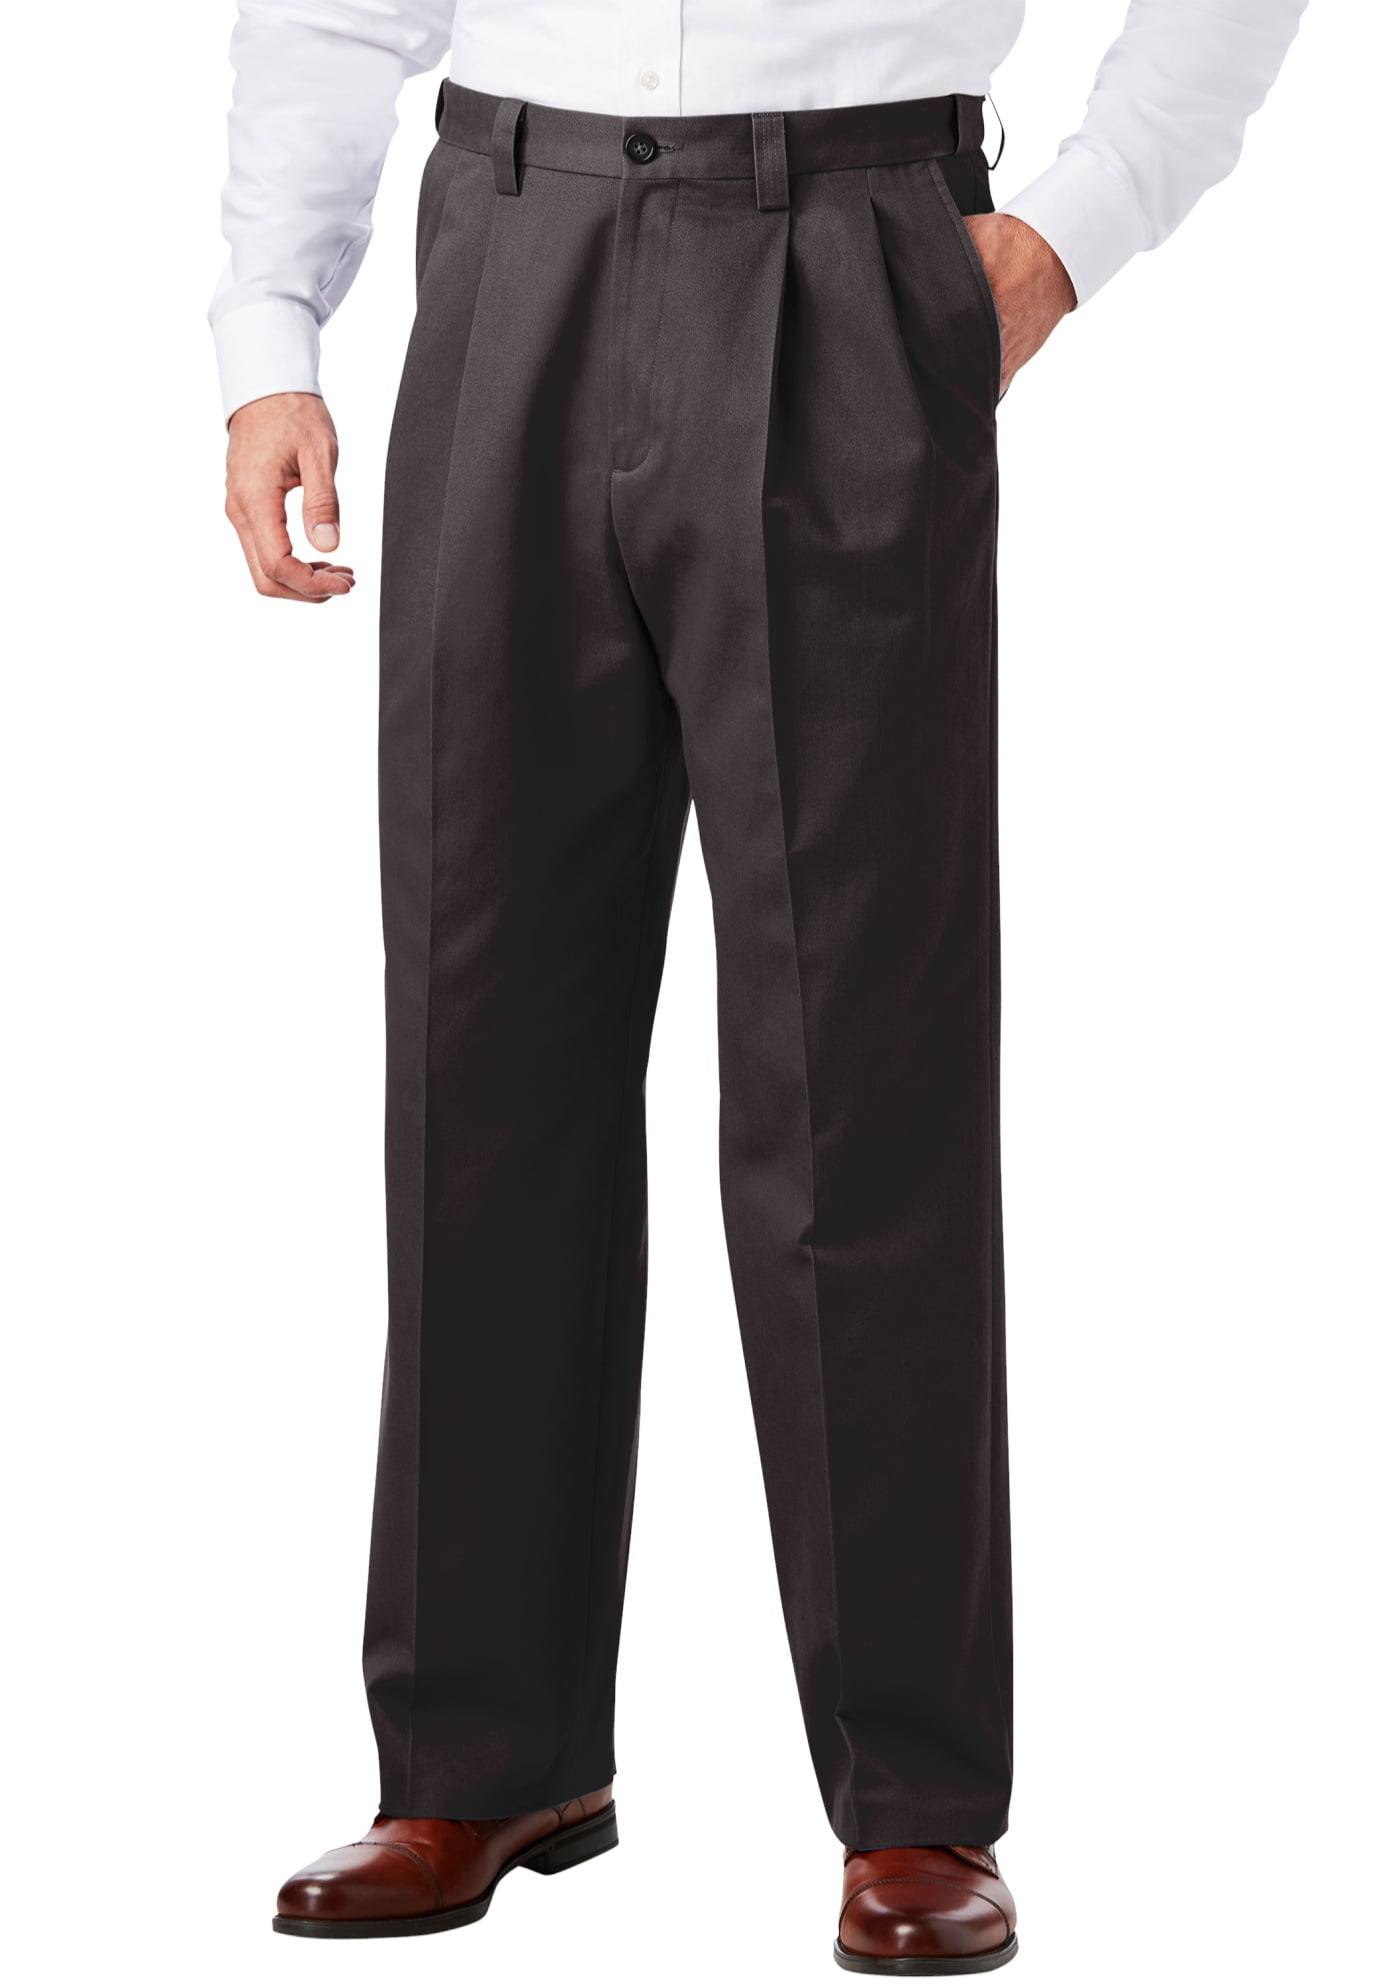 KingSize Mens Big & Tall Relaxed Fit Wrinkle-Free Expandable Waist Pleated Pants